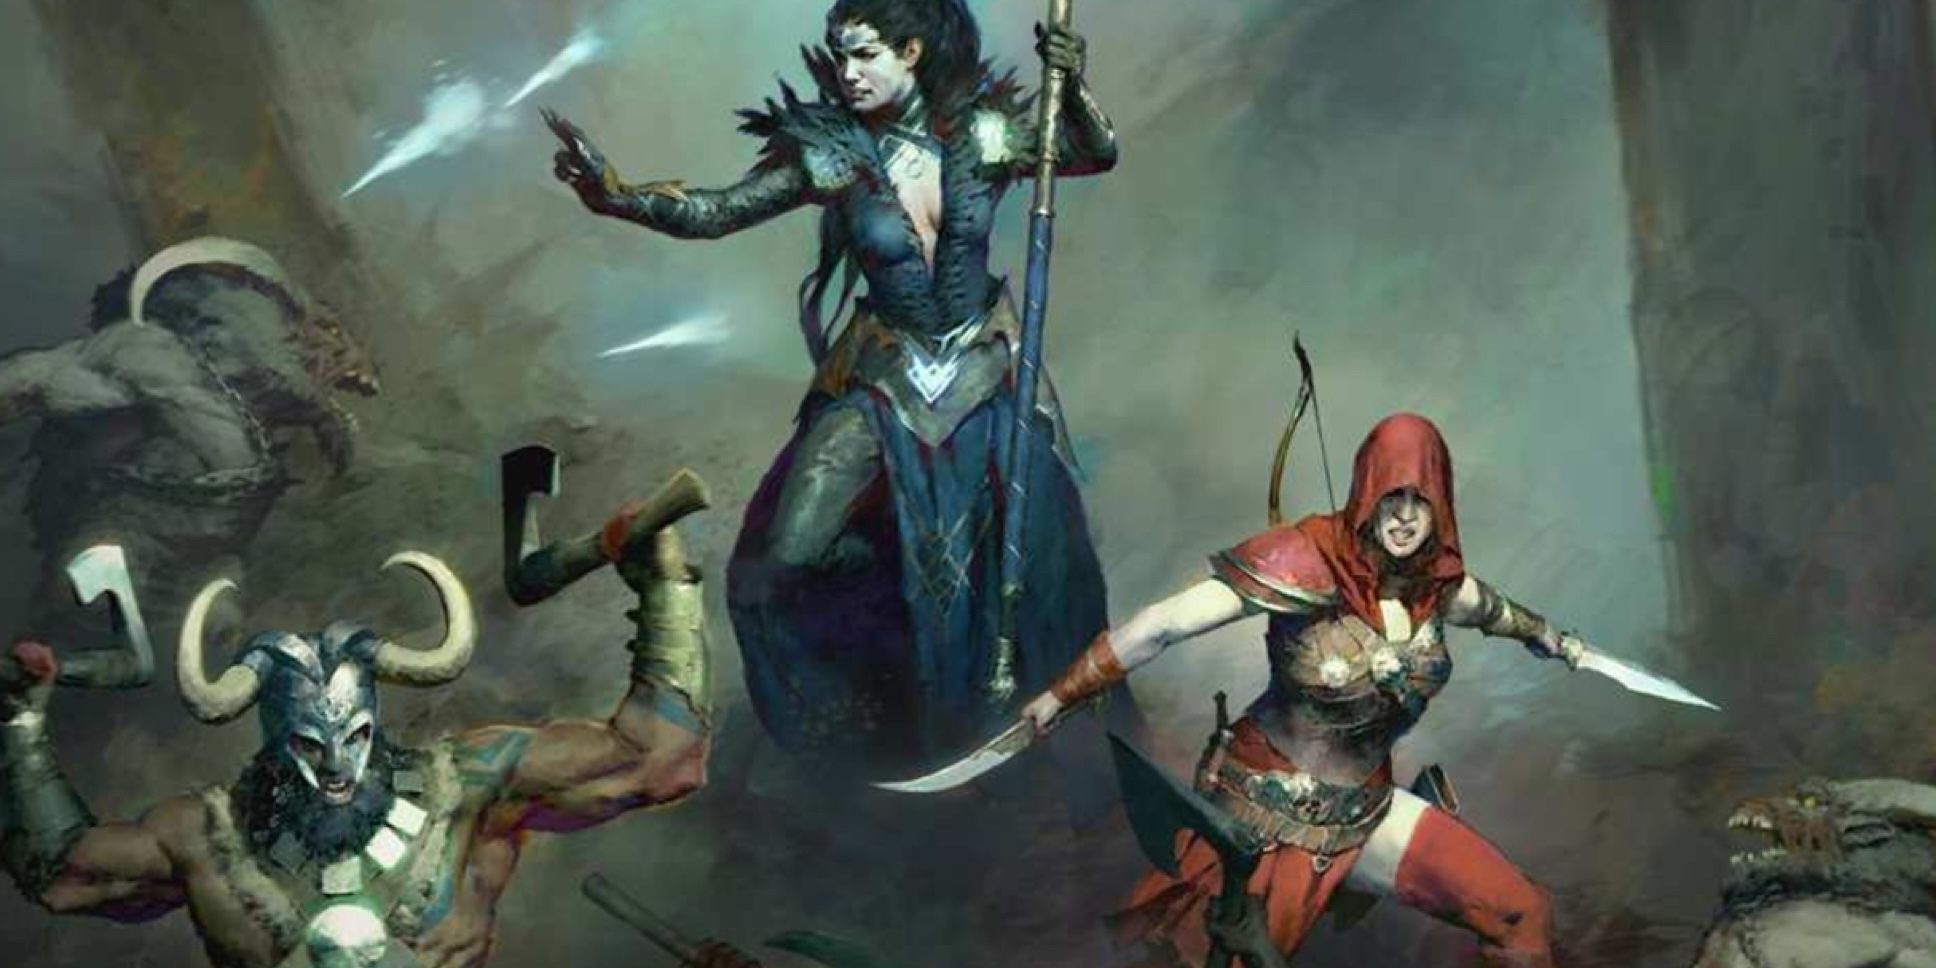 Diablo’s barbarian, sorceress and rogue classes join forces